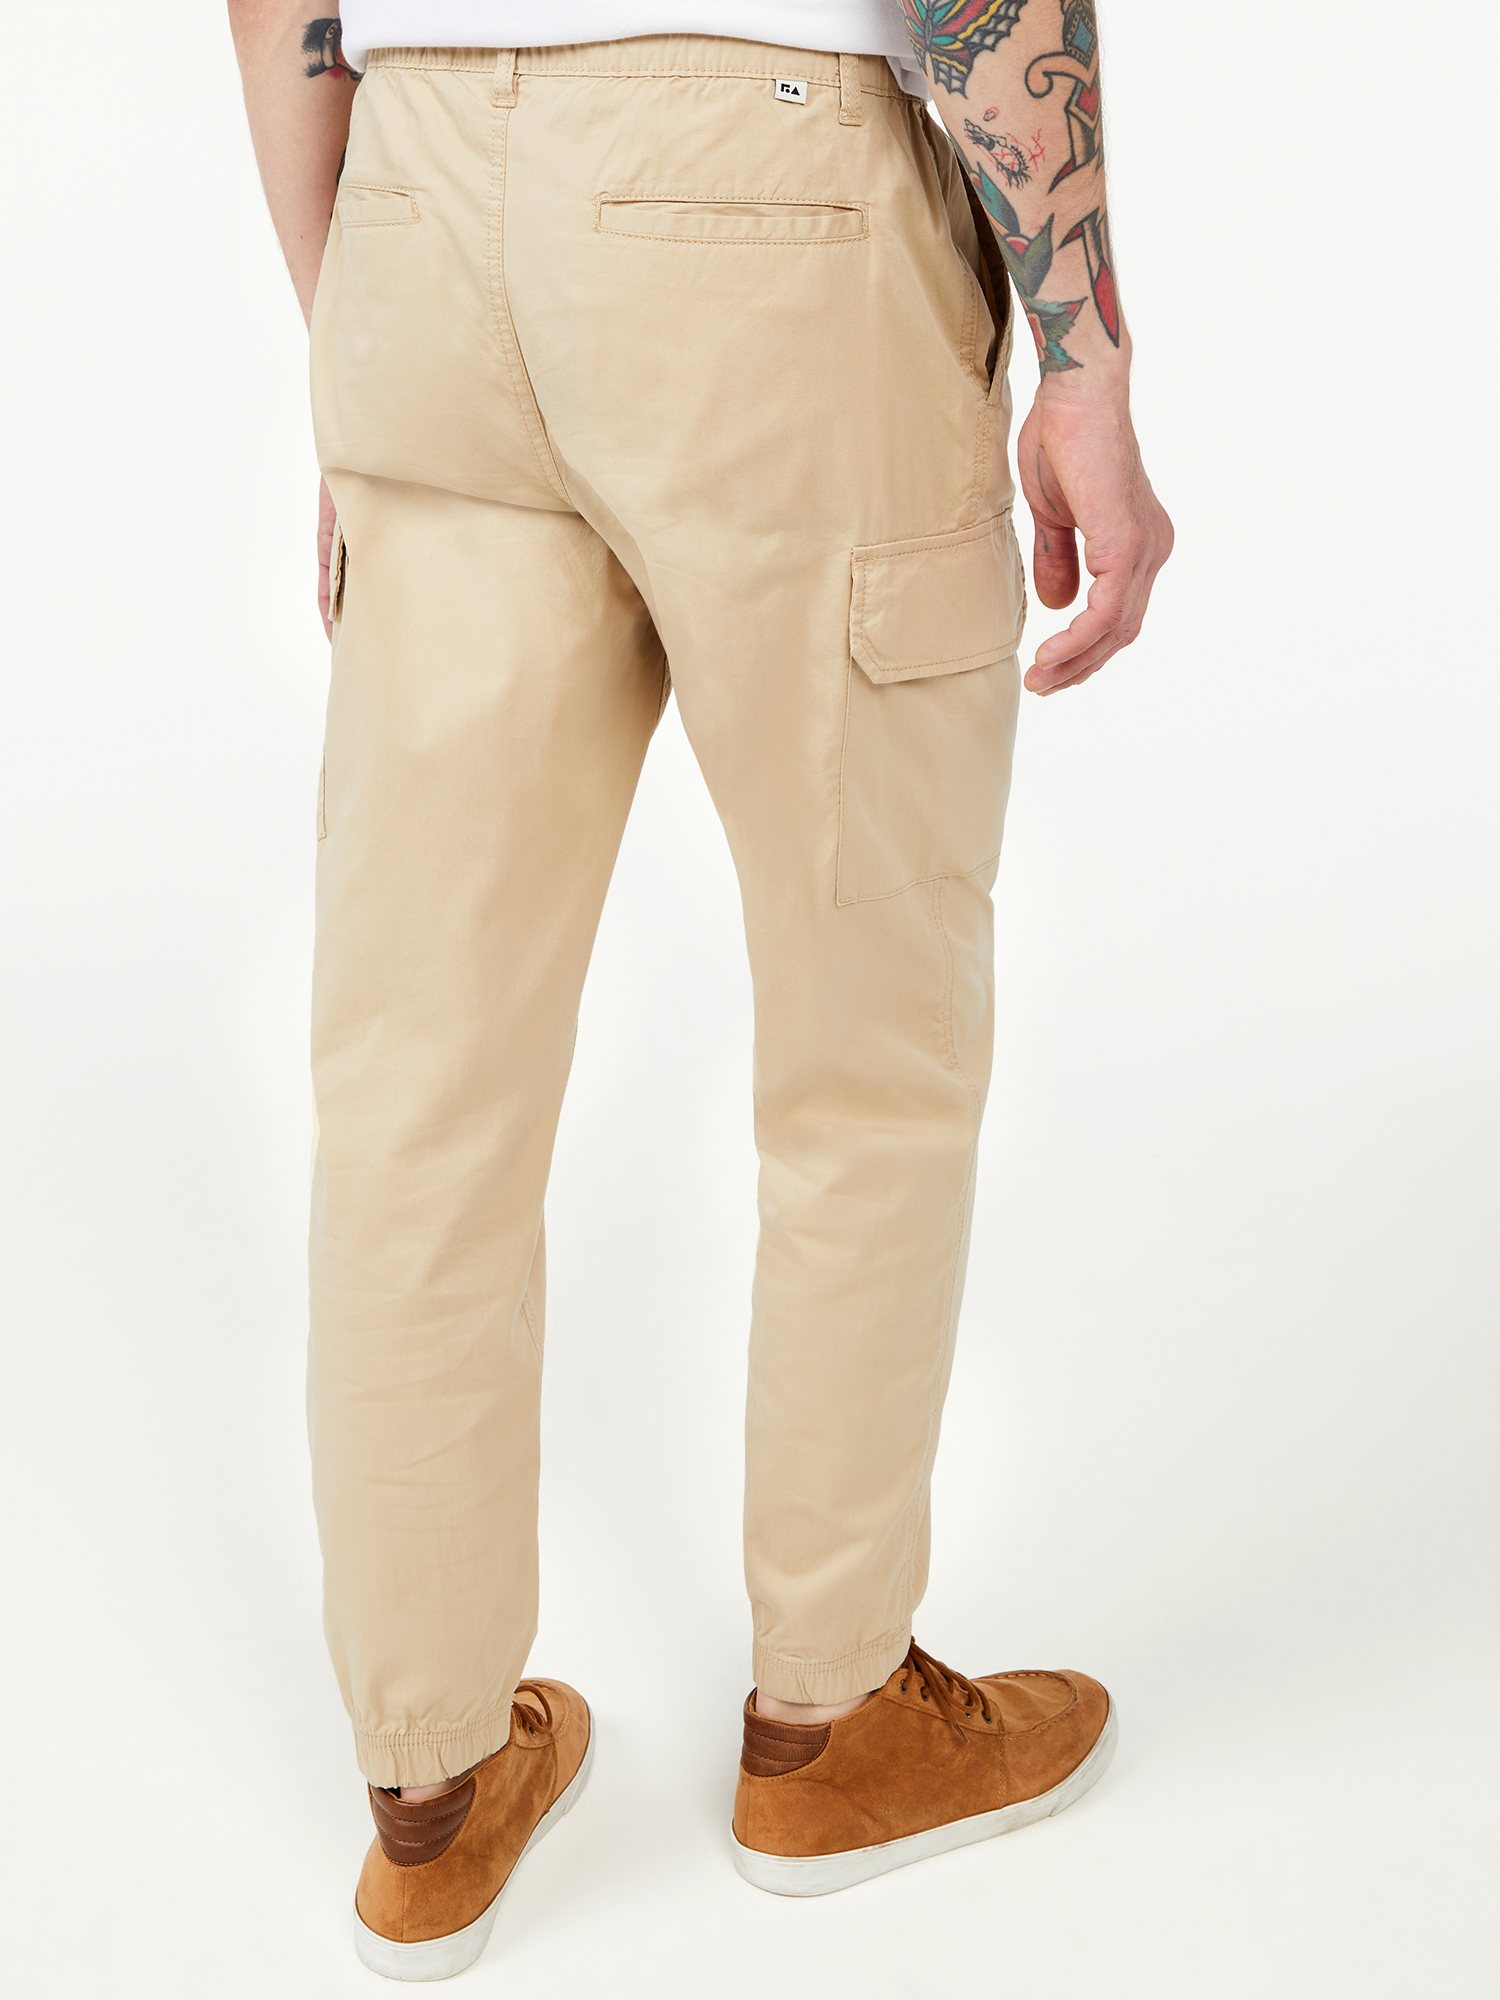 Free Assembly Men’s E-Waist Cargo Joggers - image 3 of 5